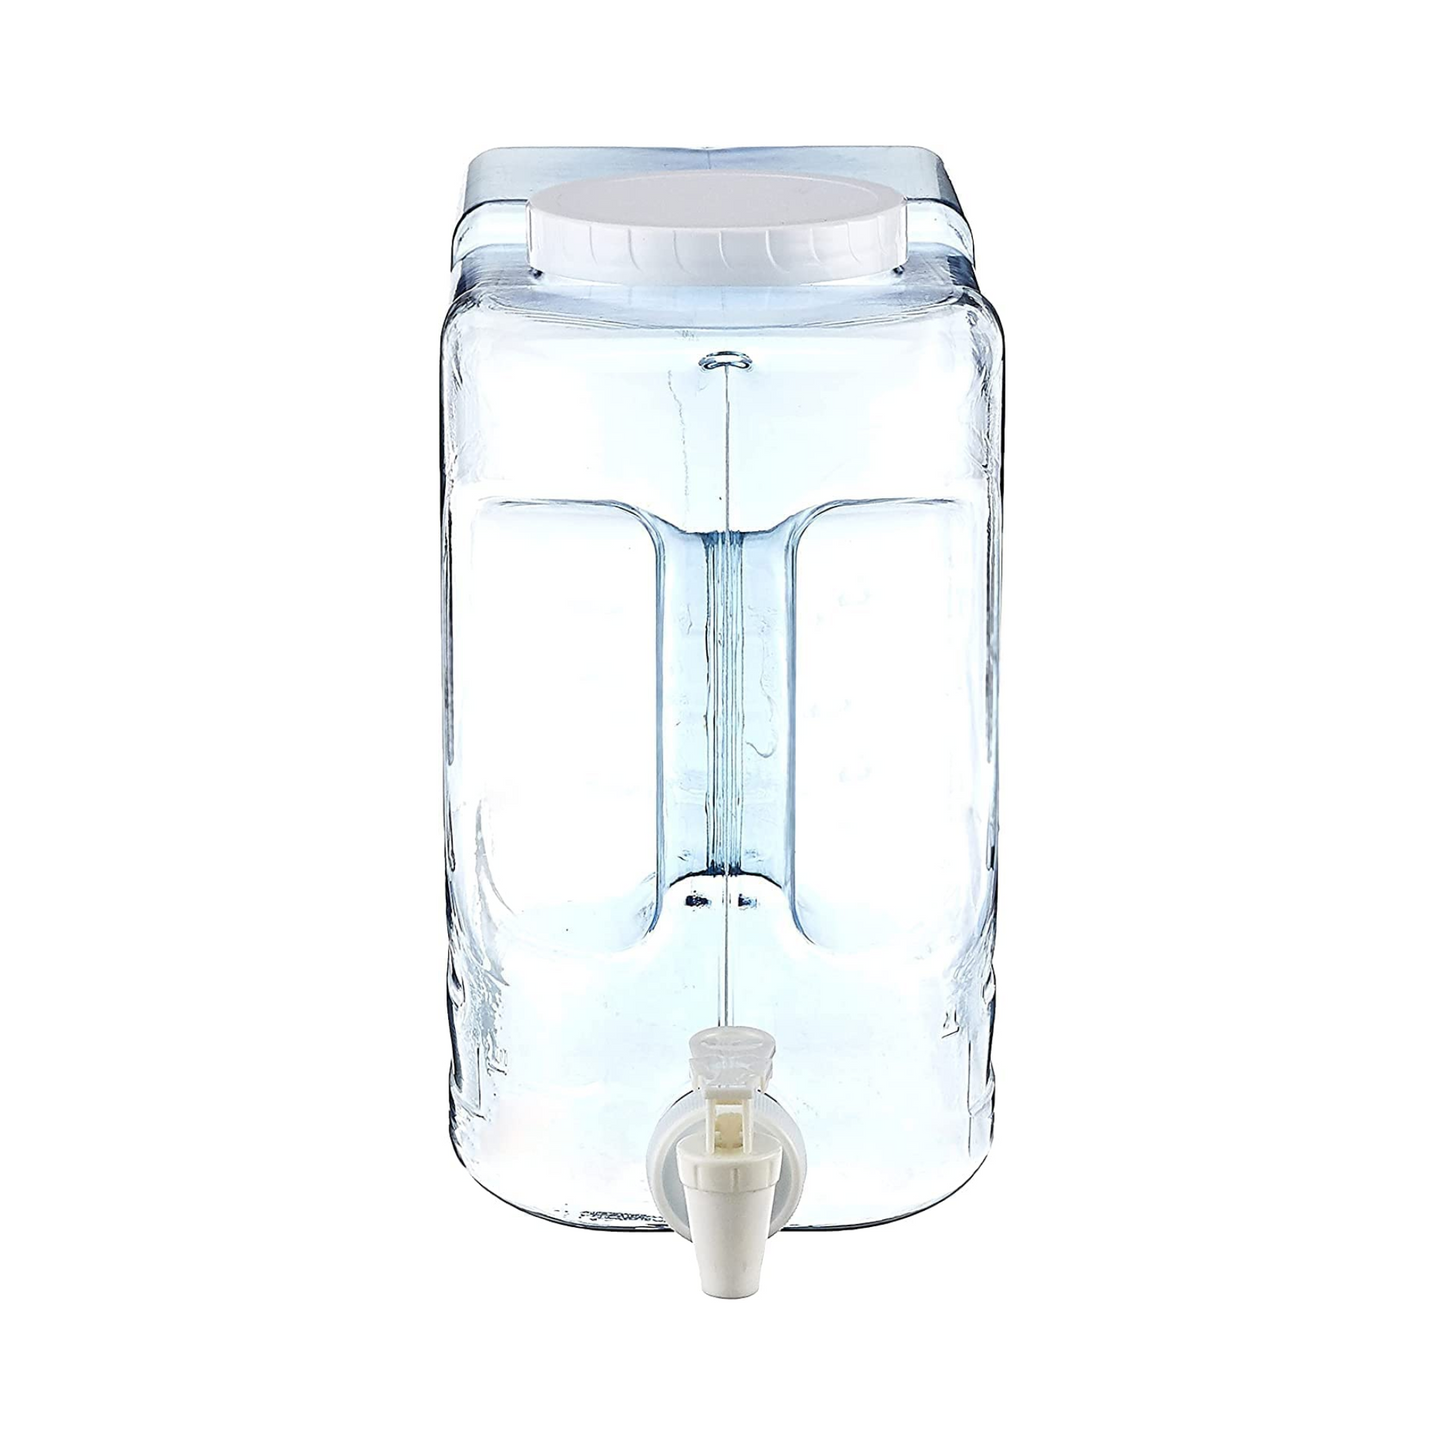 Clear blue 2.5-gallon water dispenser with spigot dispenser, easy-grip handle, and leak-proof screw cap for convenient use.